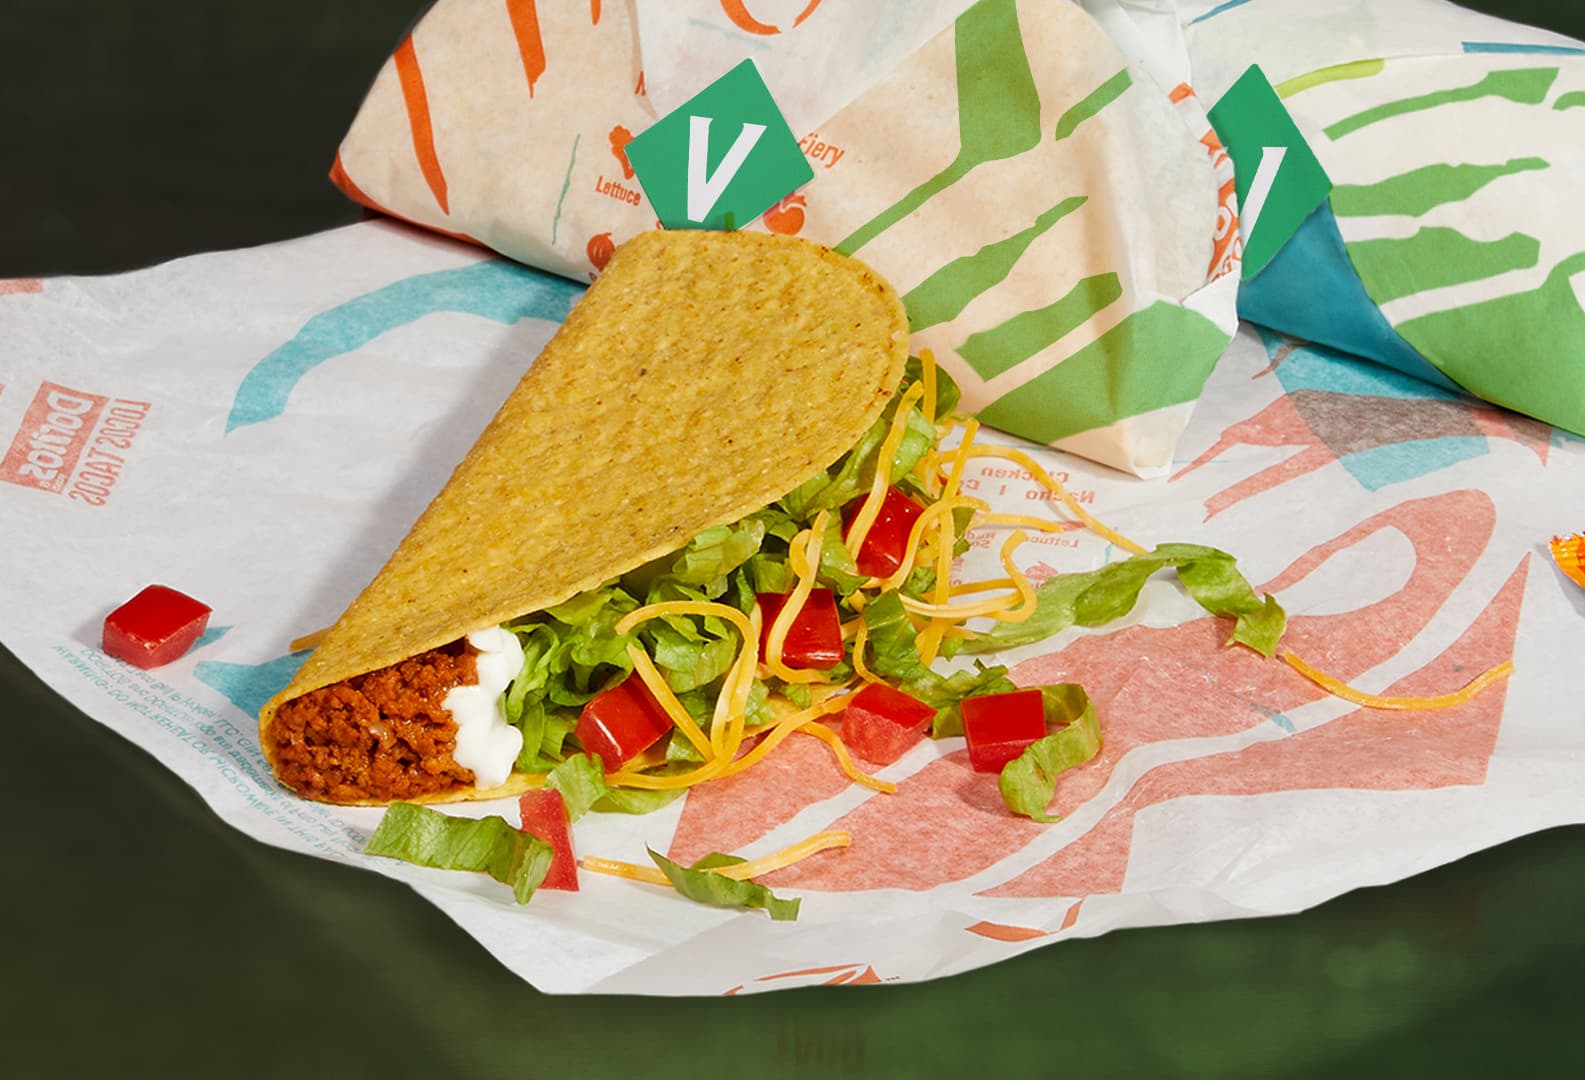 Taco Bell tests its own meat alternative before the Beyond Meat process